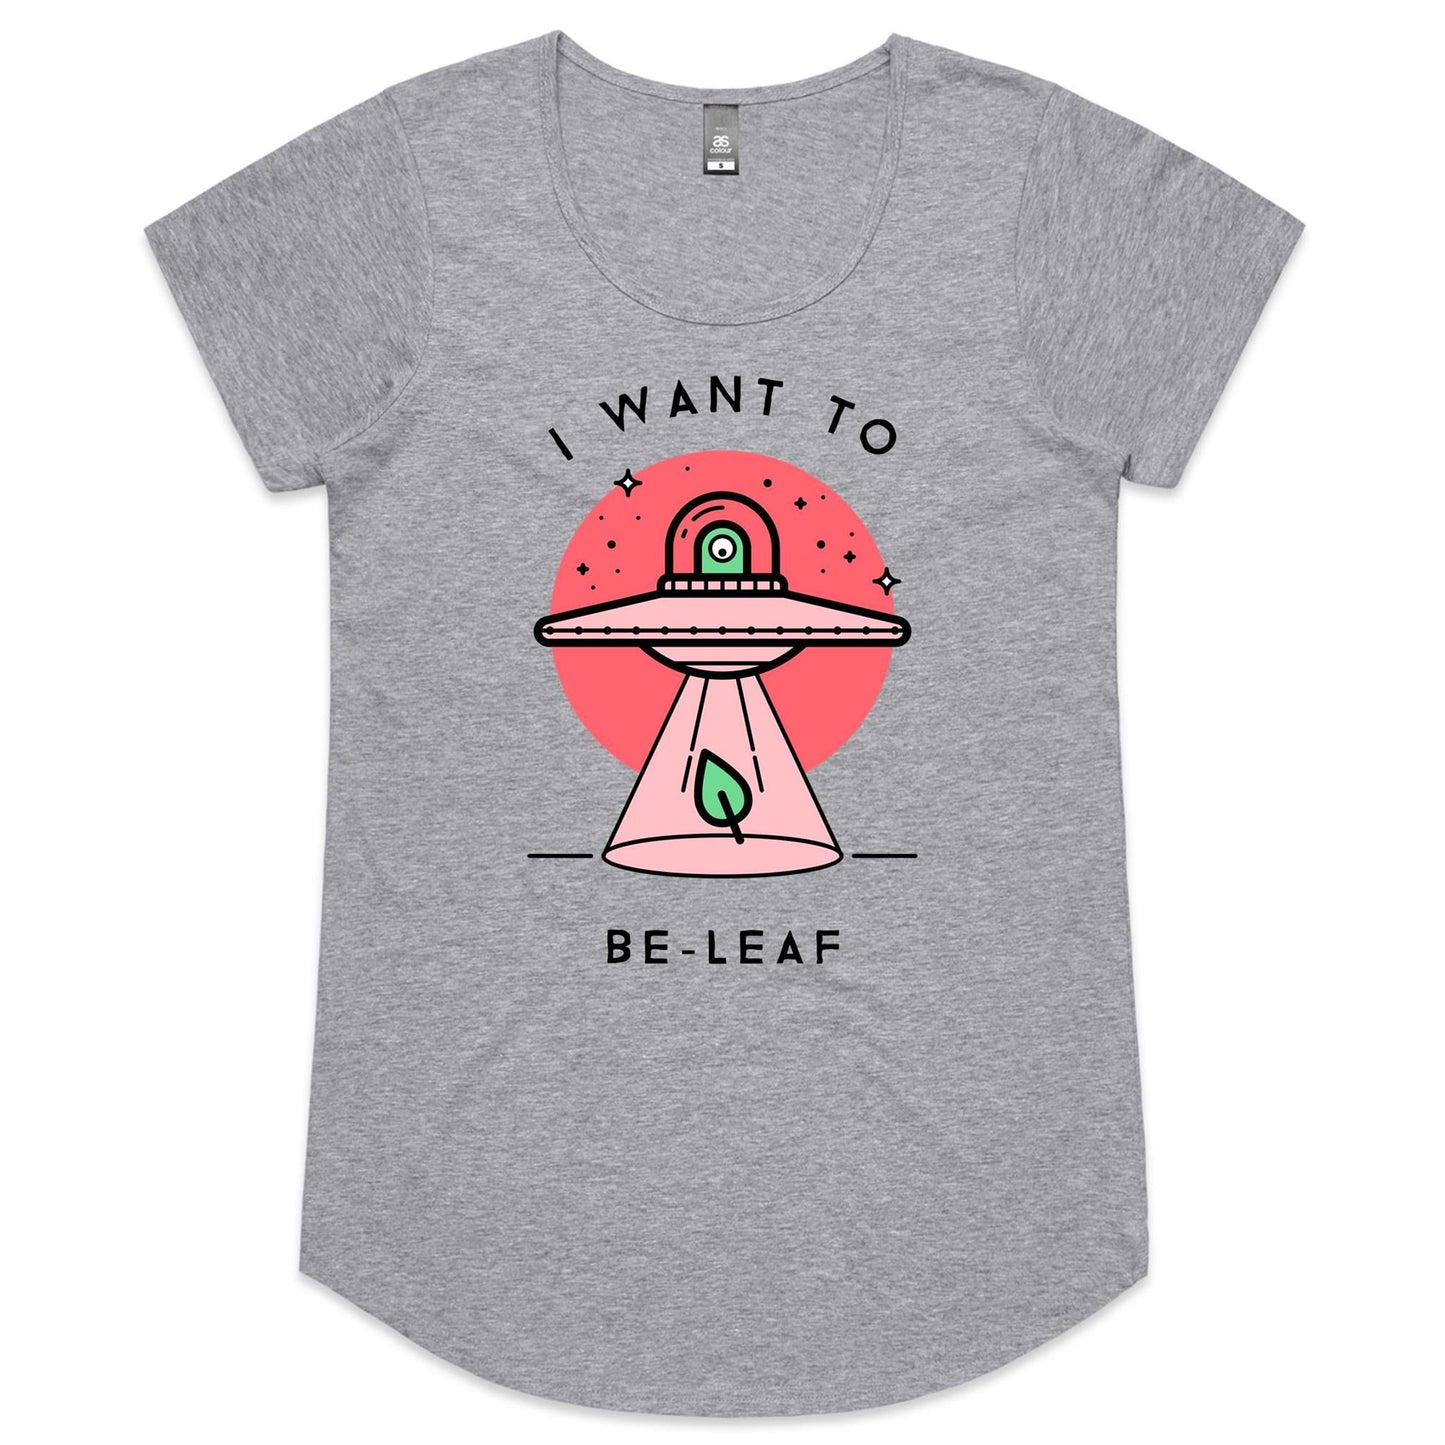 I Want To Be-Leaf, UFO - Womens Scoop Neck T-Shirt Grey Marle Womens Scoop Neck T-shirt Sci Fi